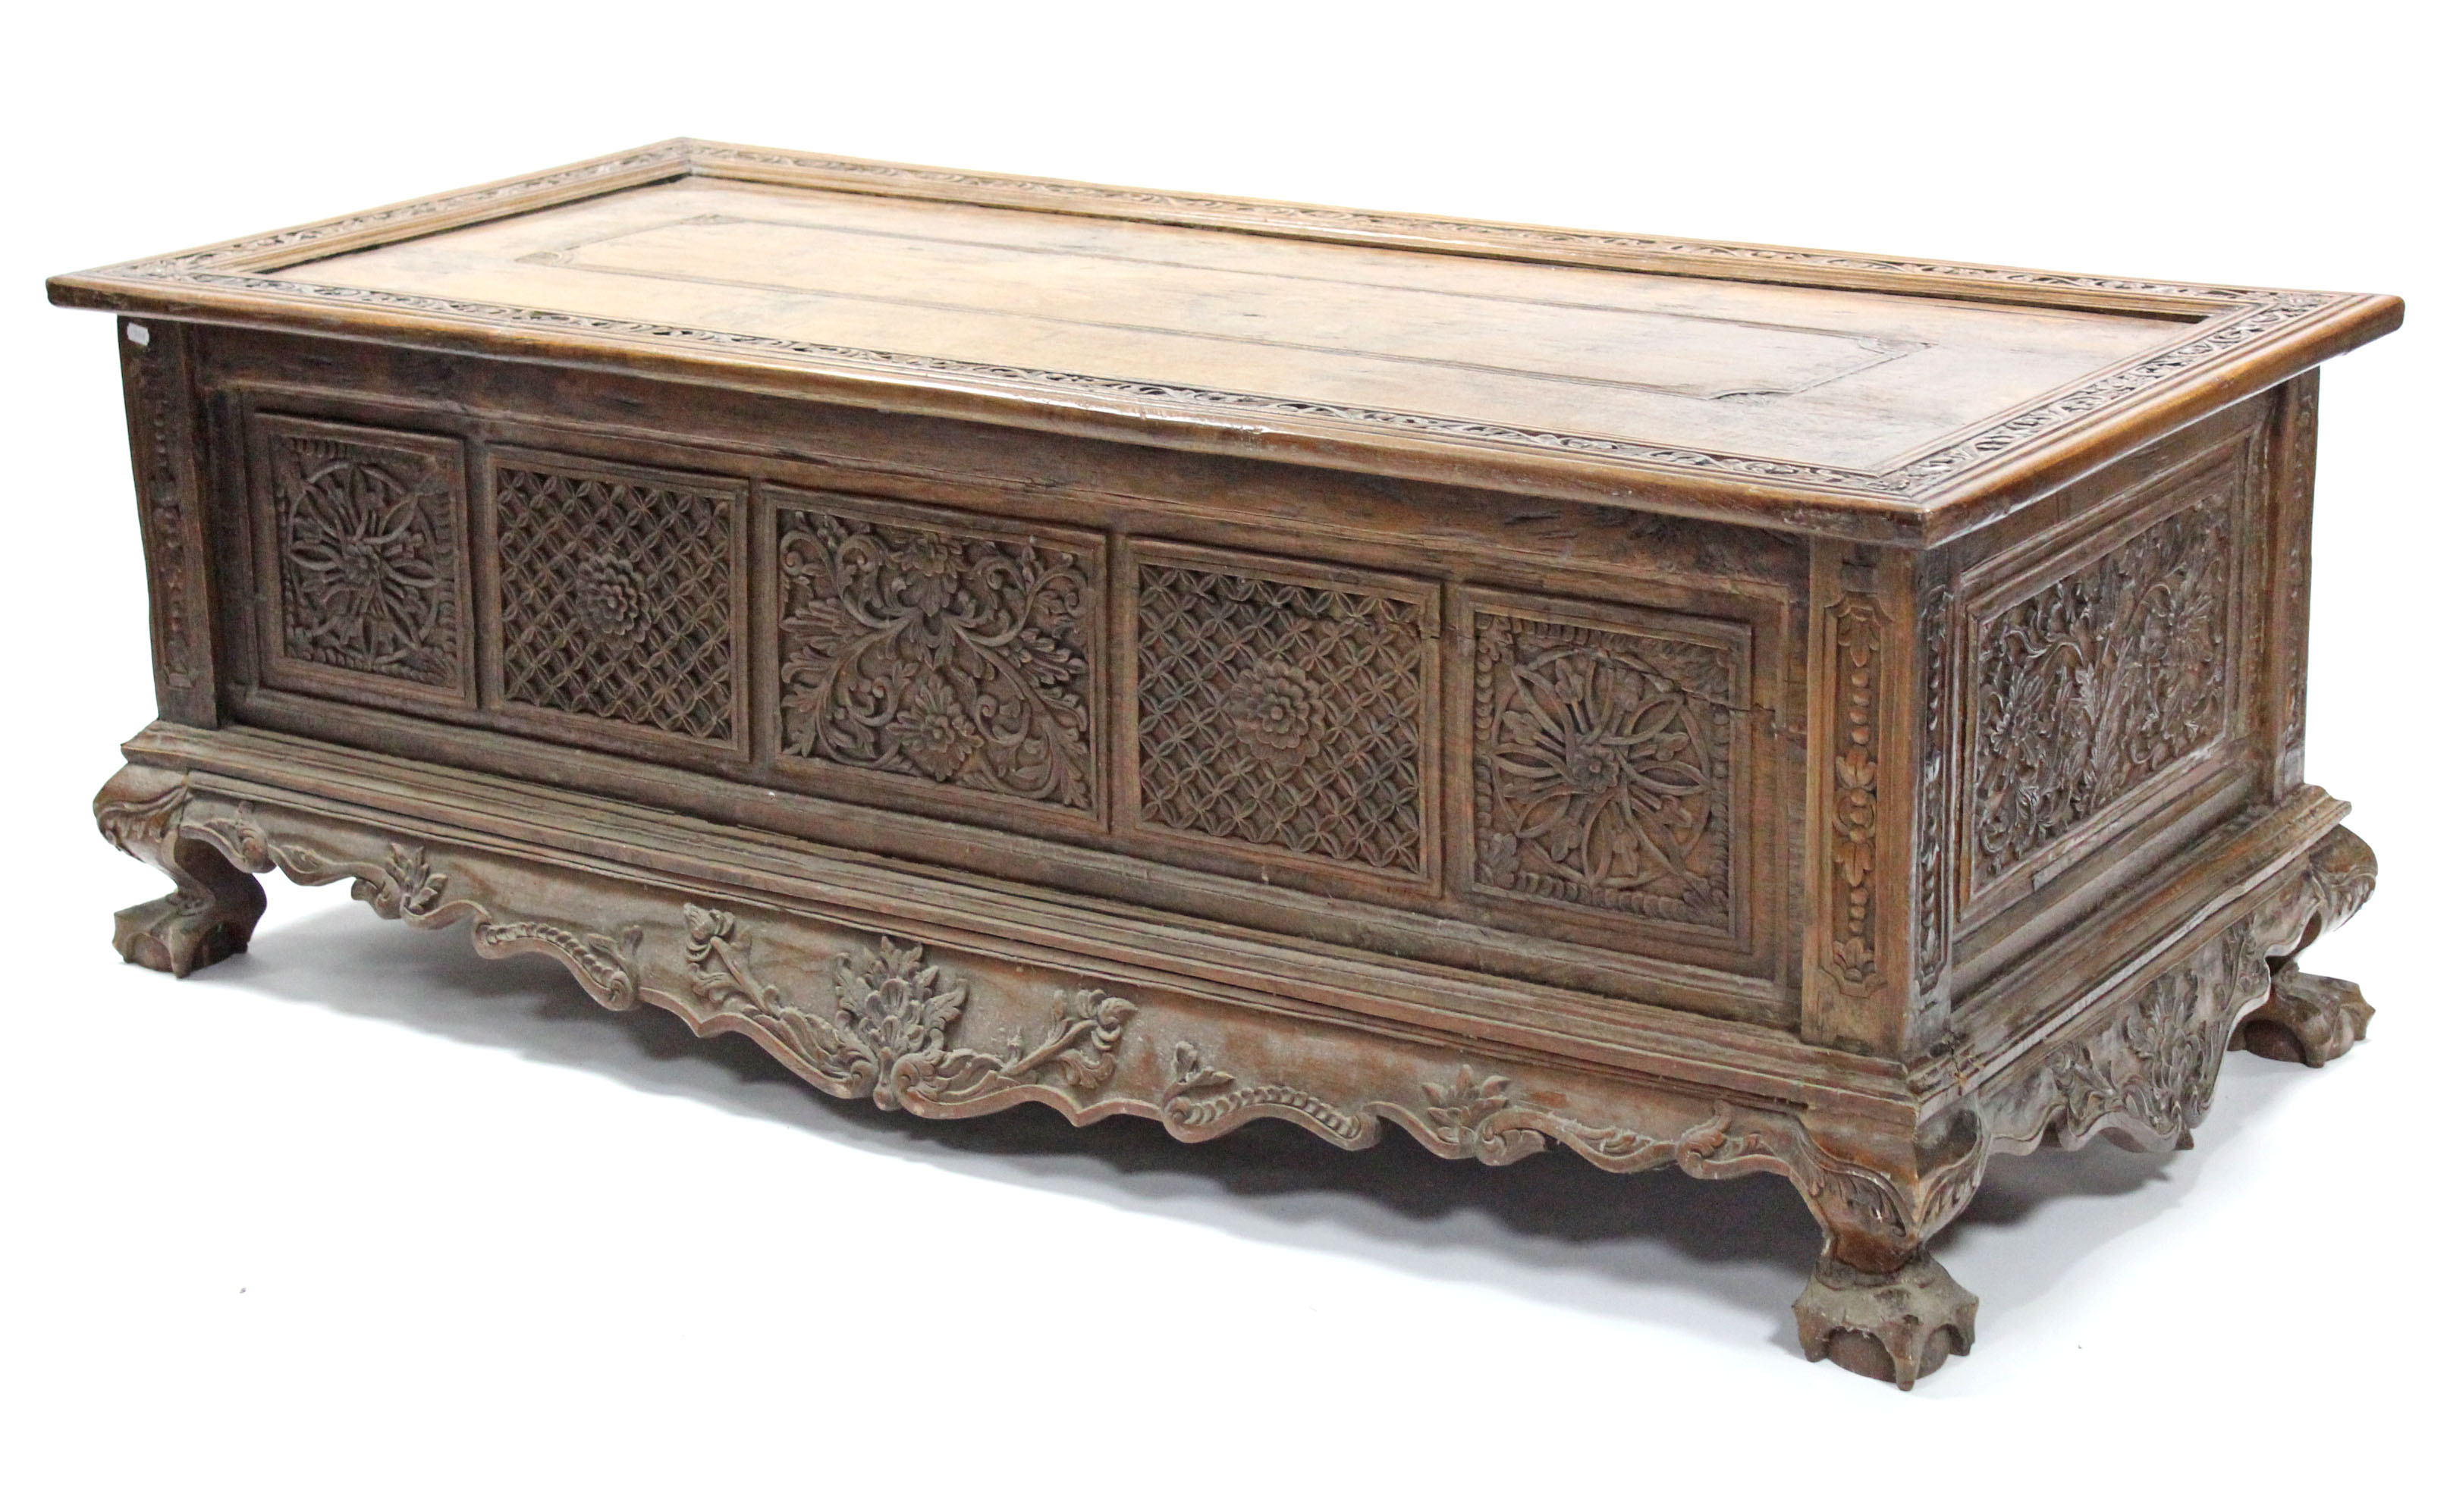 A 19th century INDONESIAN SOLID HARDWOOD CHEST, profusely carved to all sides with floral & - Image 8 of 11